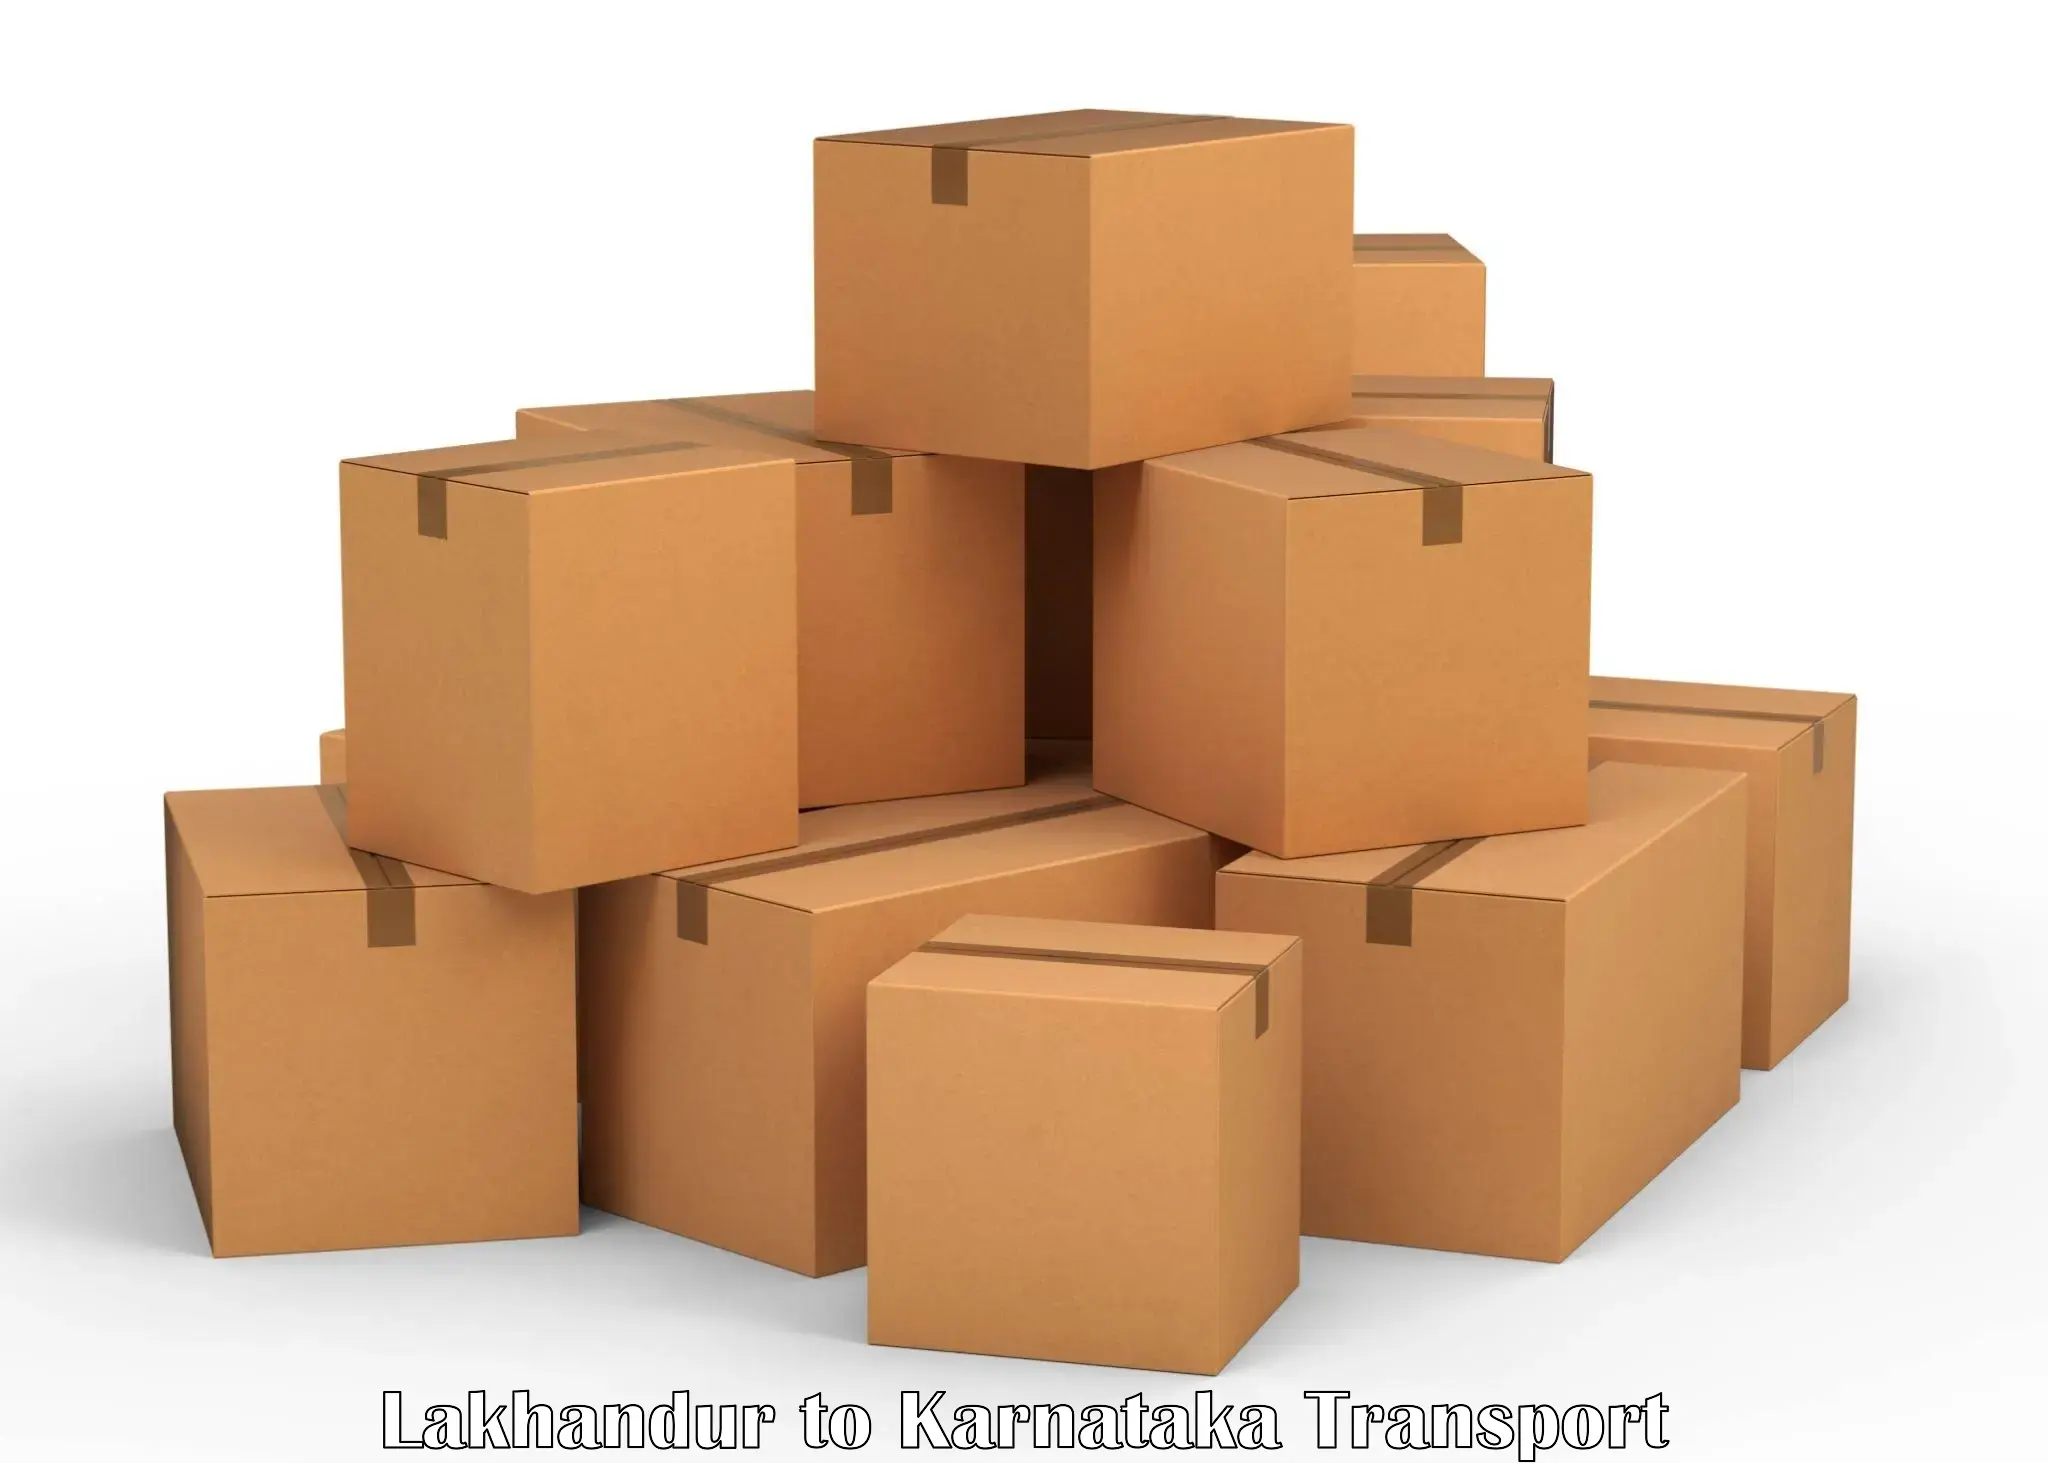 Delivery service Lakhandur to Manipal